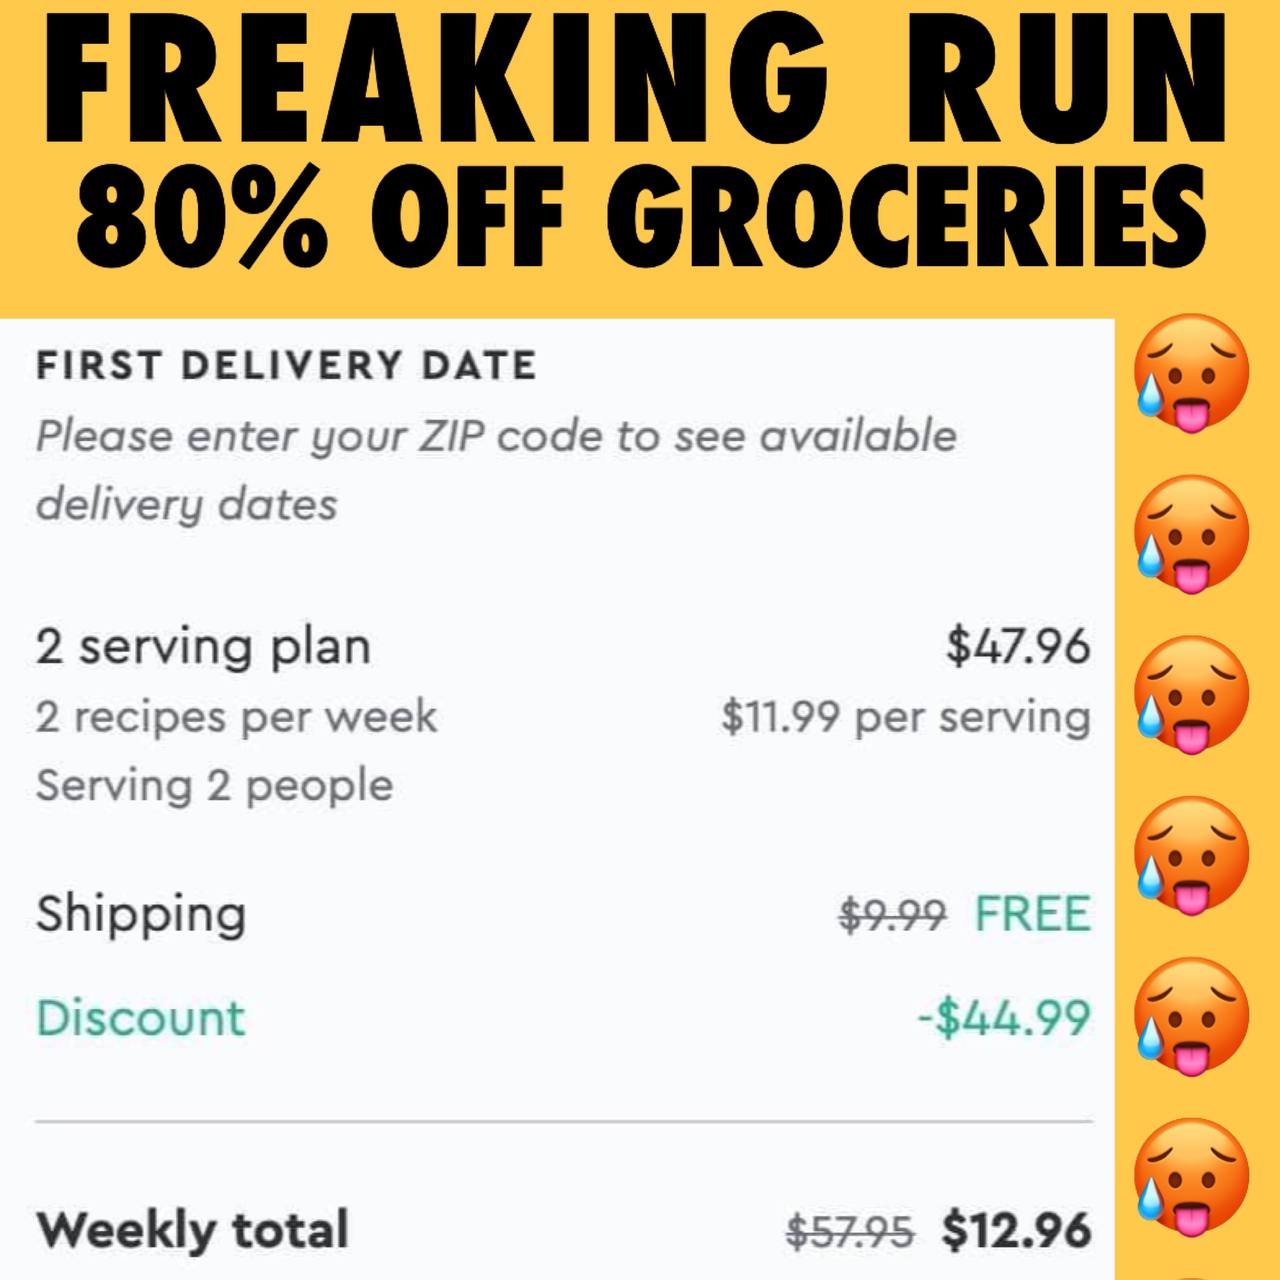 80% Off Groceries But You Better Hurry!